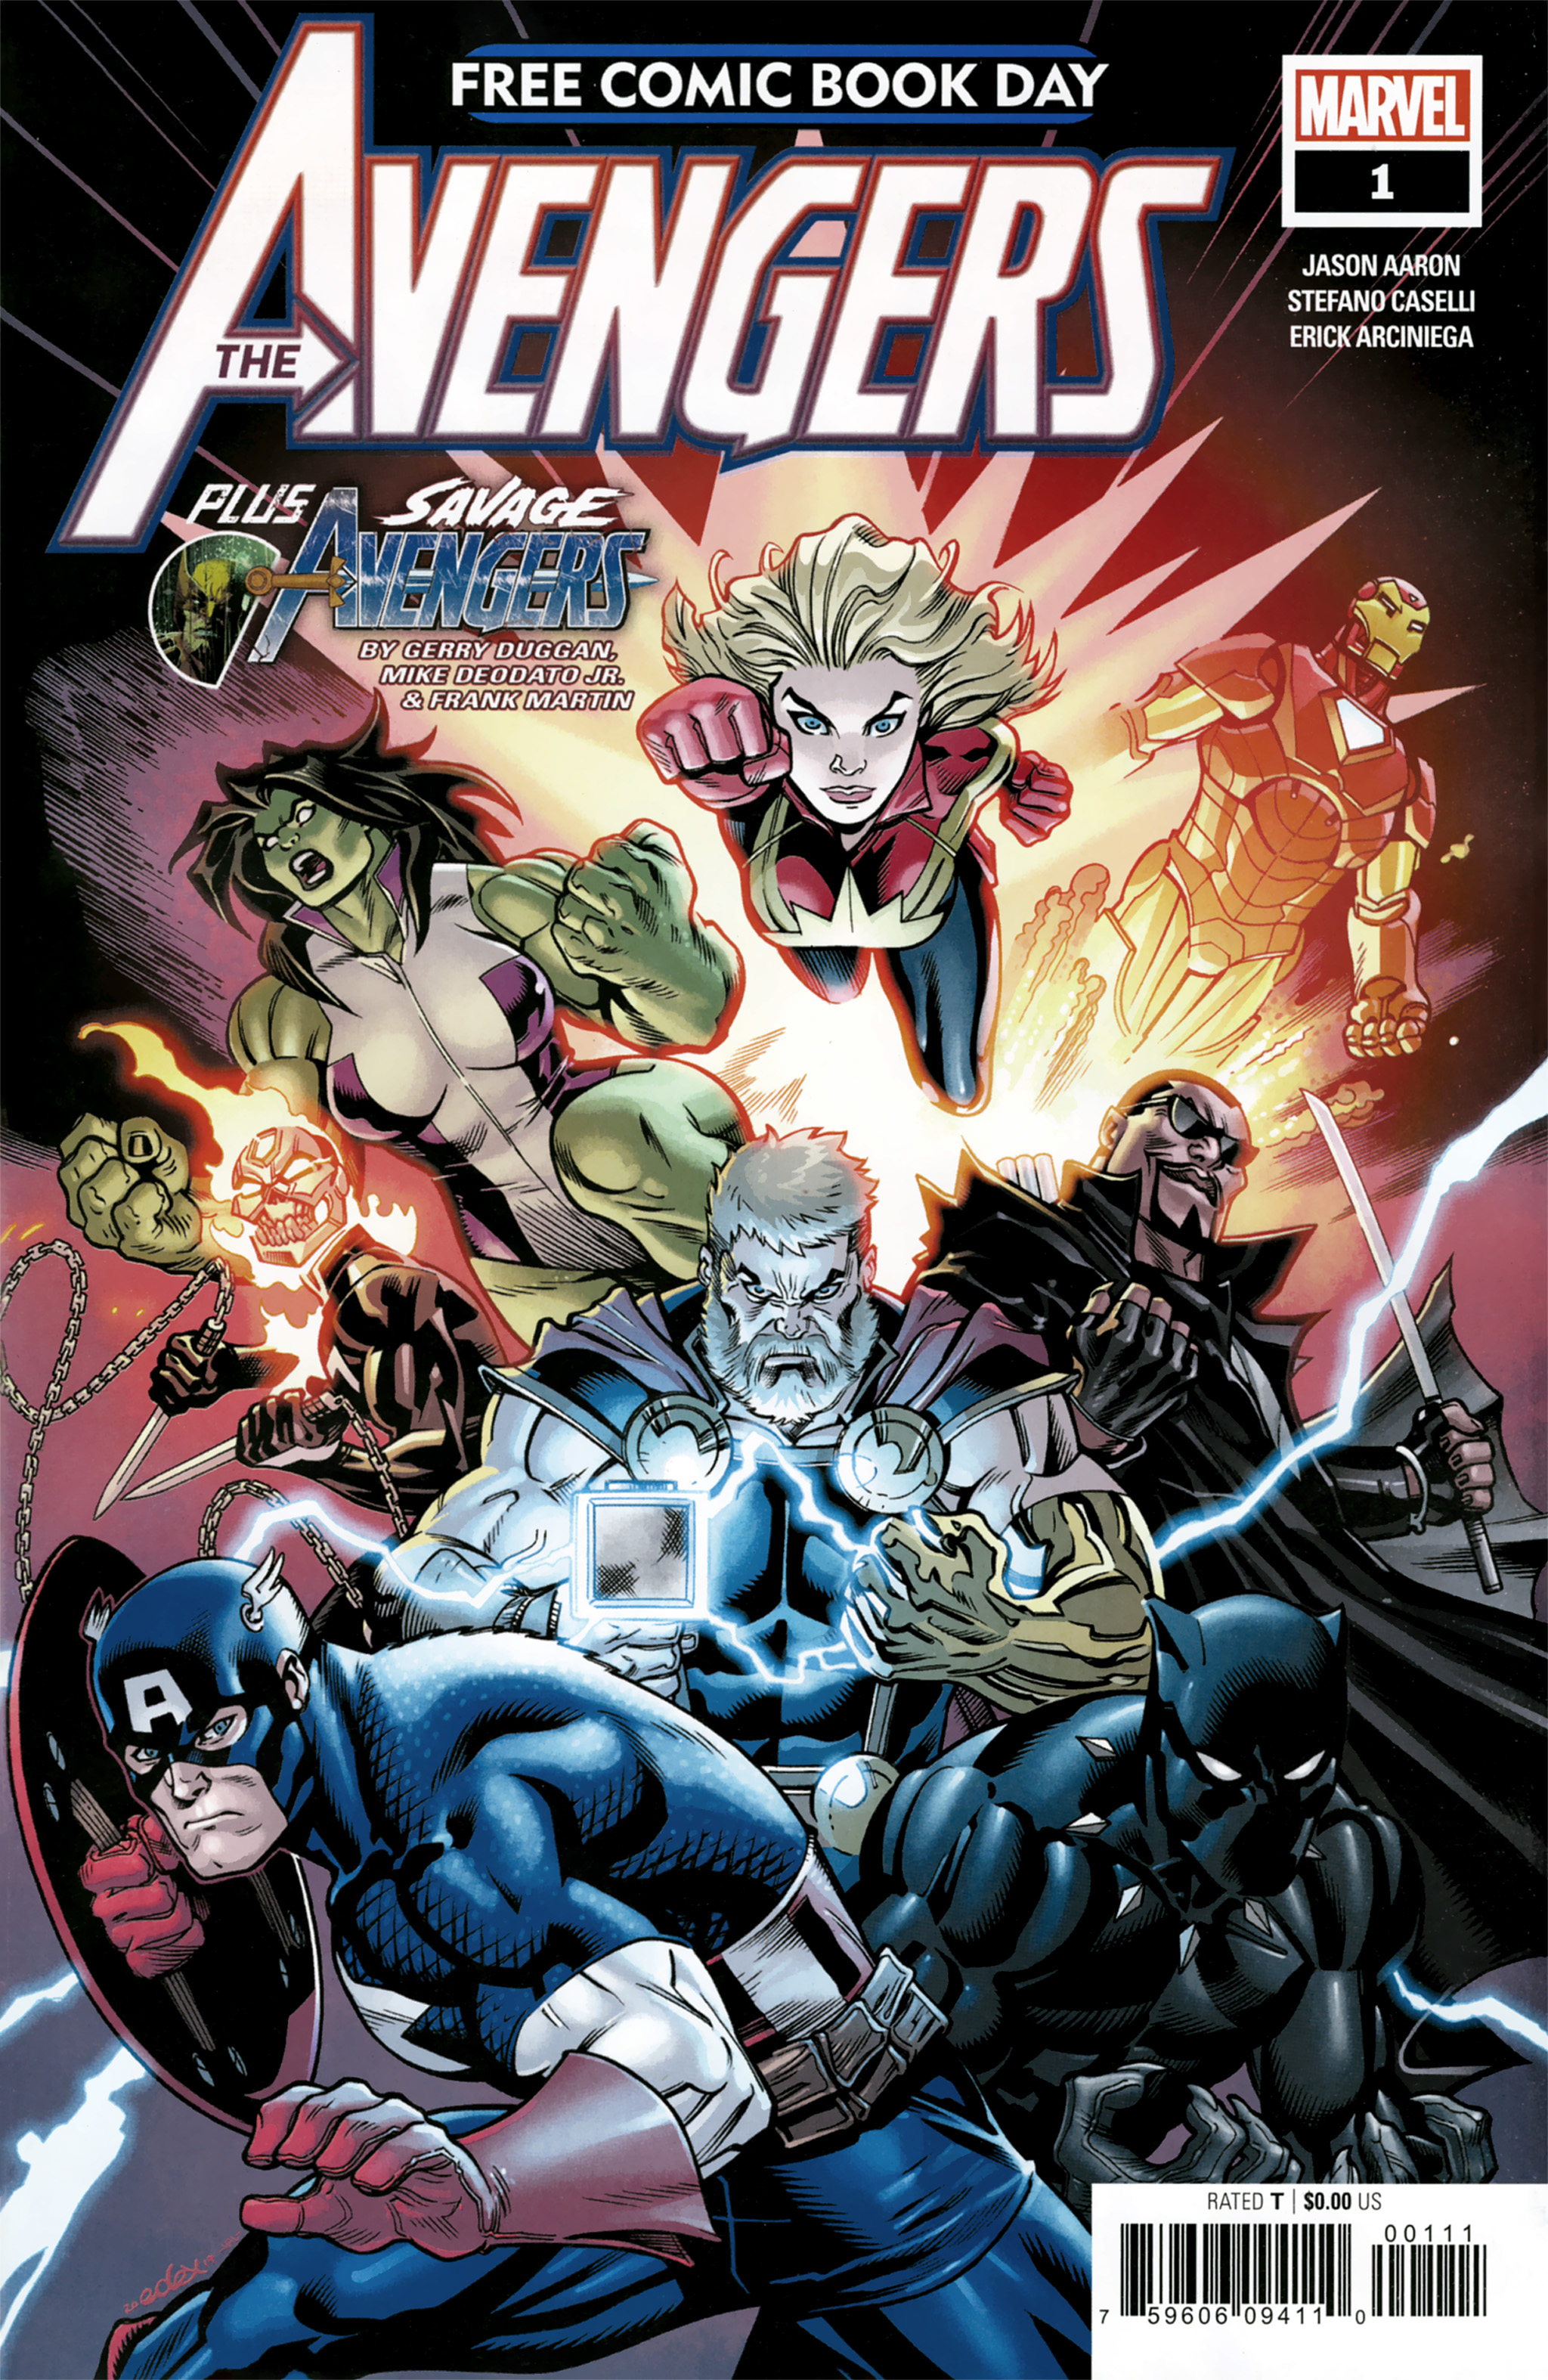 Read online Free Comic Book Day 2019 comic -  Issue # Avengers - 1